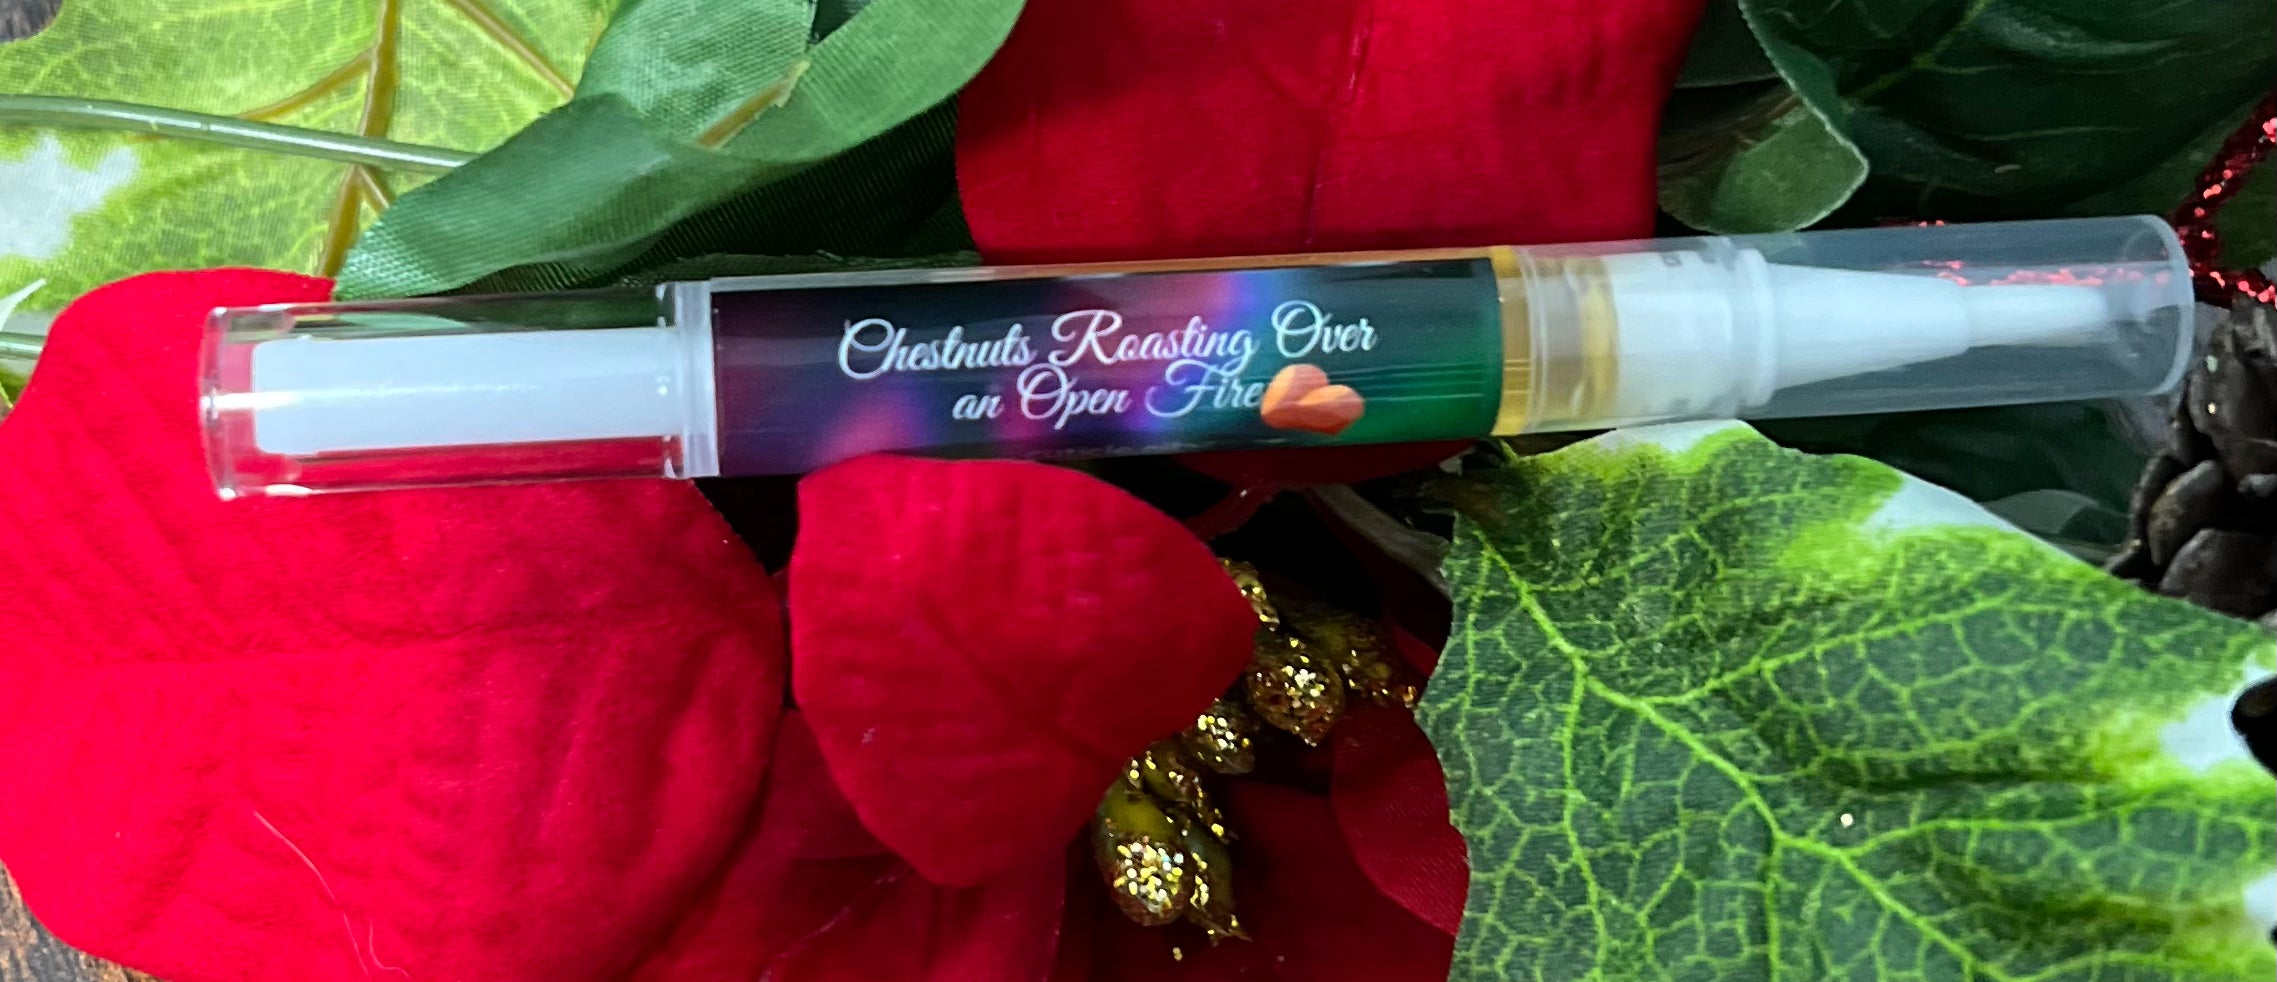 Chestnuts Roasting Over An Open Fire Cuticle Oil (retiring)